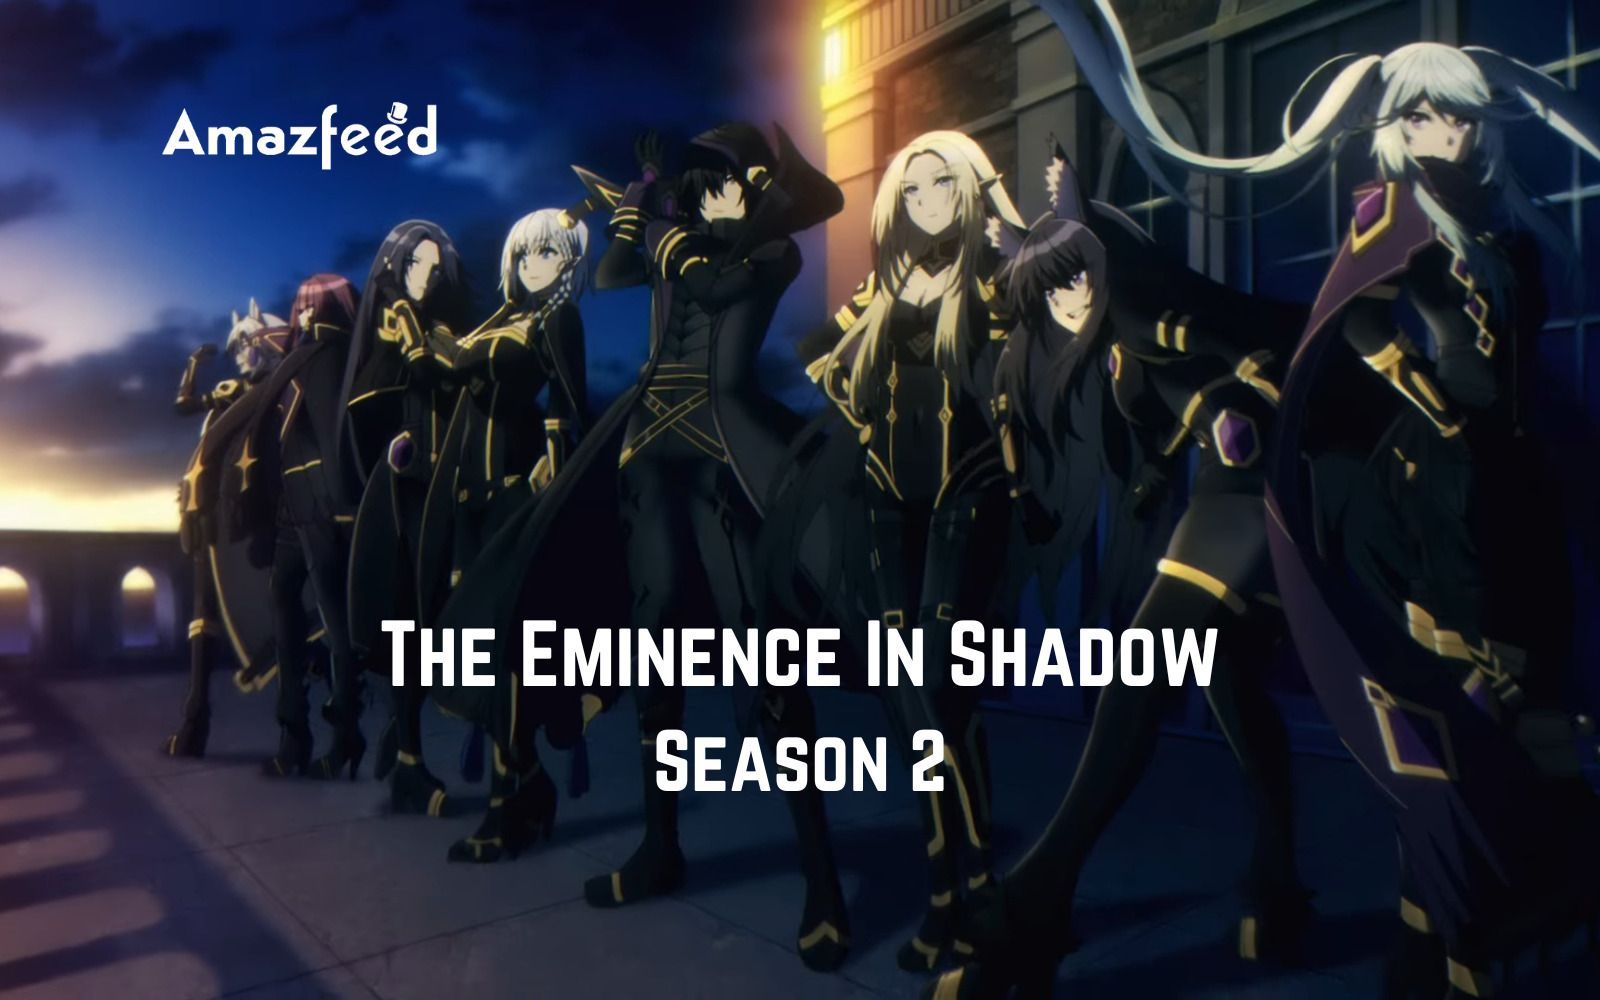 Eminence in Shadow Listed With 20 Episodes, Set To Air in 2 Consecutive  Cours